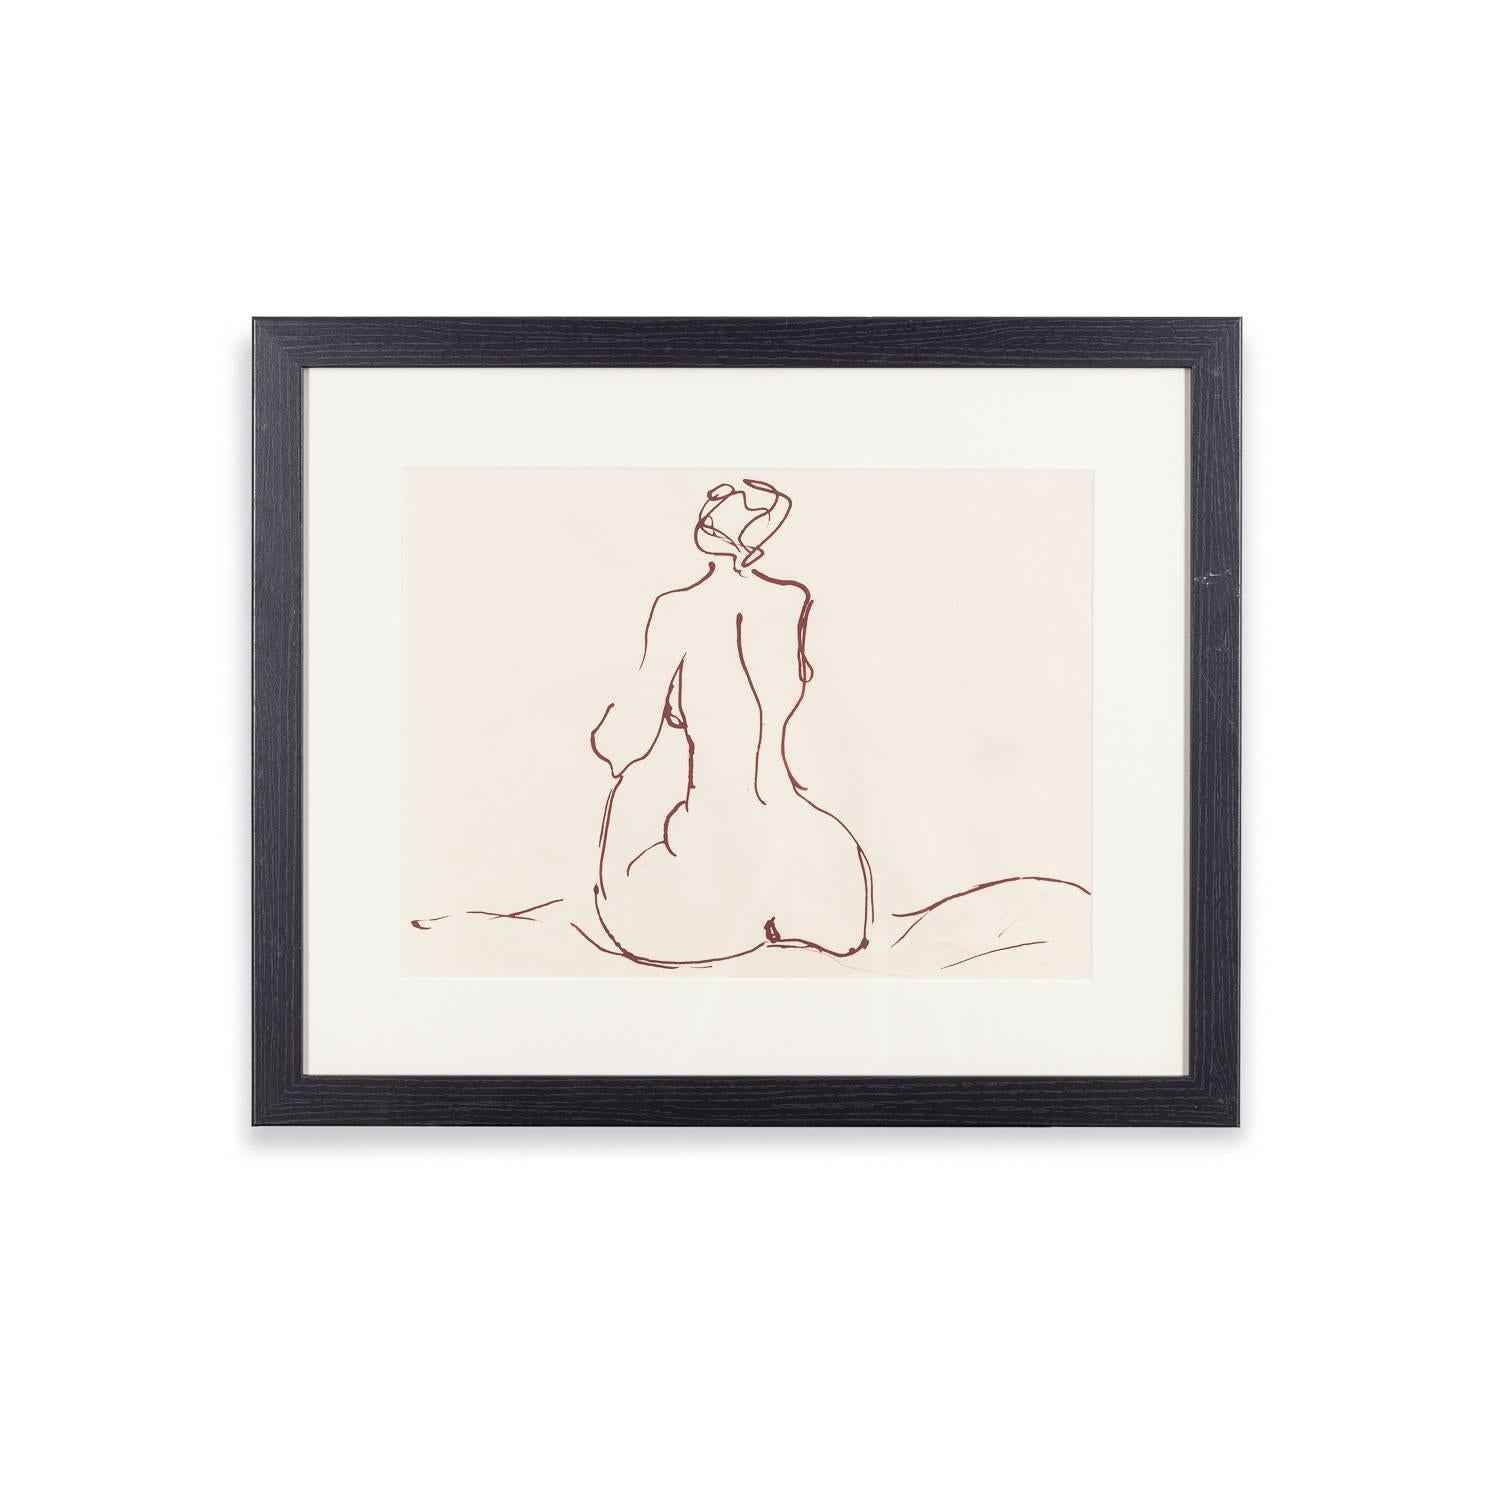 Framed sketch by Doris Lindemann.

Doris Lindemann is a full time artist, printmaker and art tutor.

She is from Germany originally but spent time in Ireland and England studying before settling in St. Ives, Cornwall where she now lives.

She often